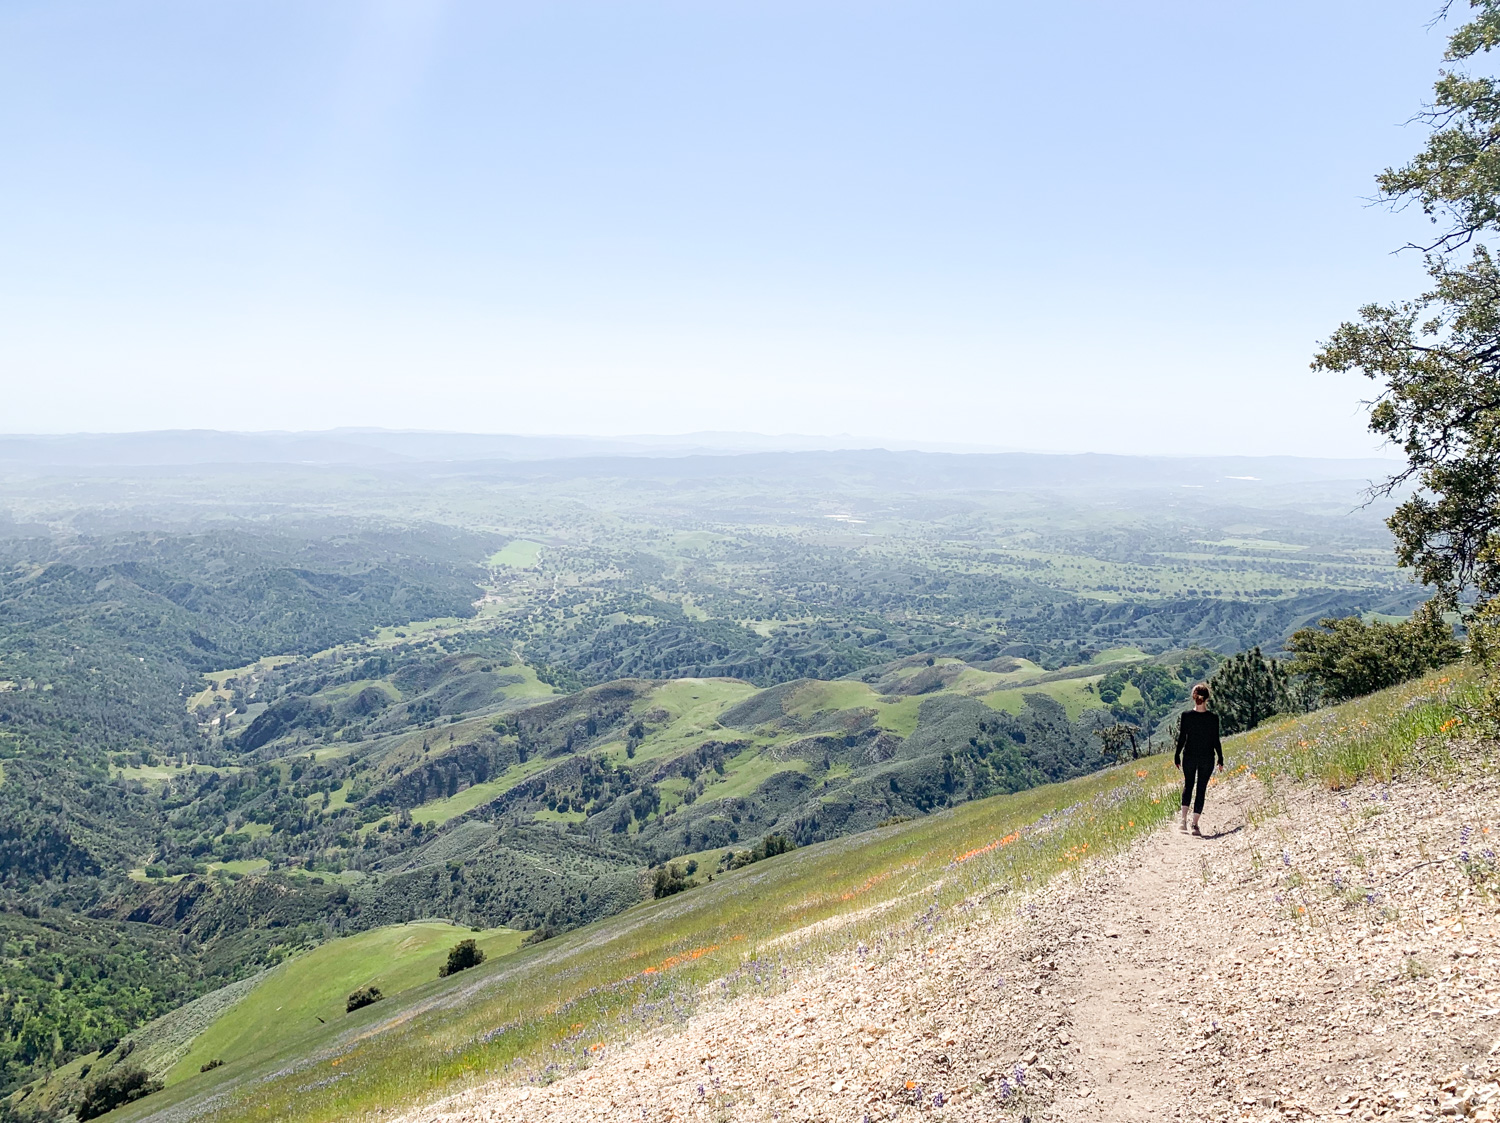 The author on a hike during the Super Bloom on Grass Mountain in Santa Ynez Valley, California. Photo by Brian Gibson.